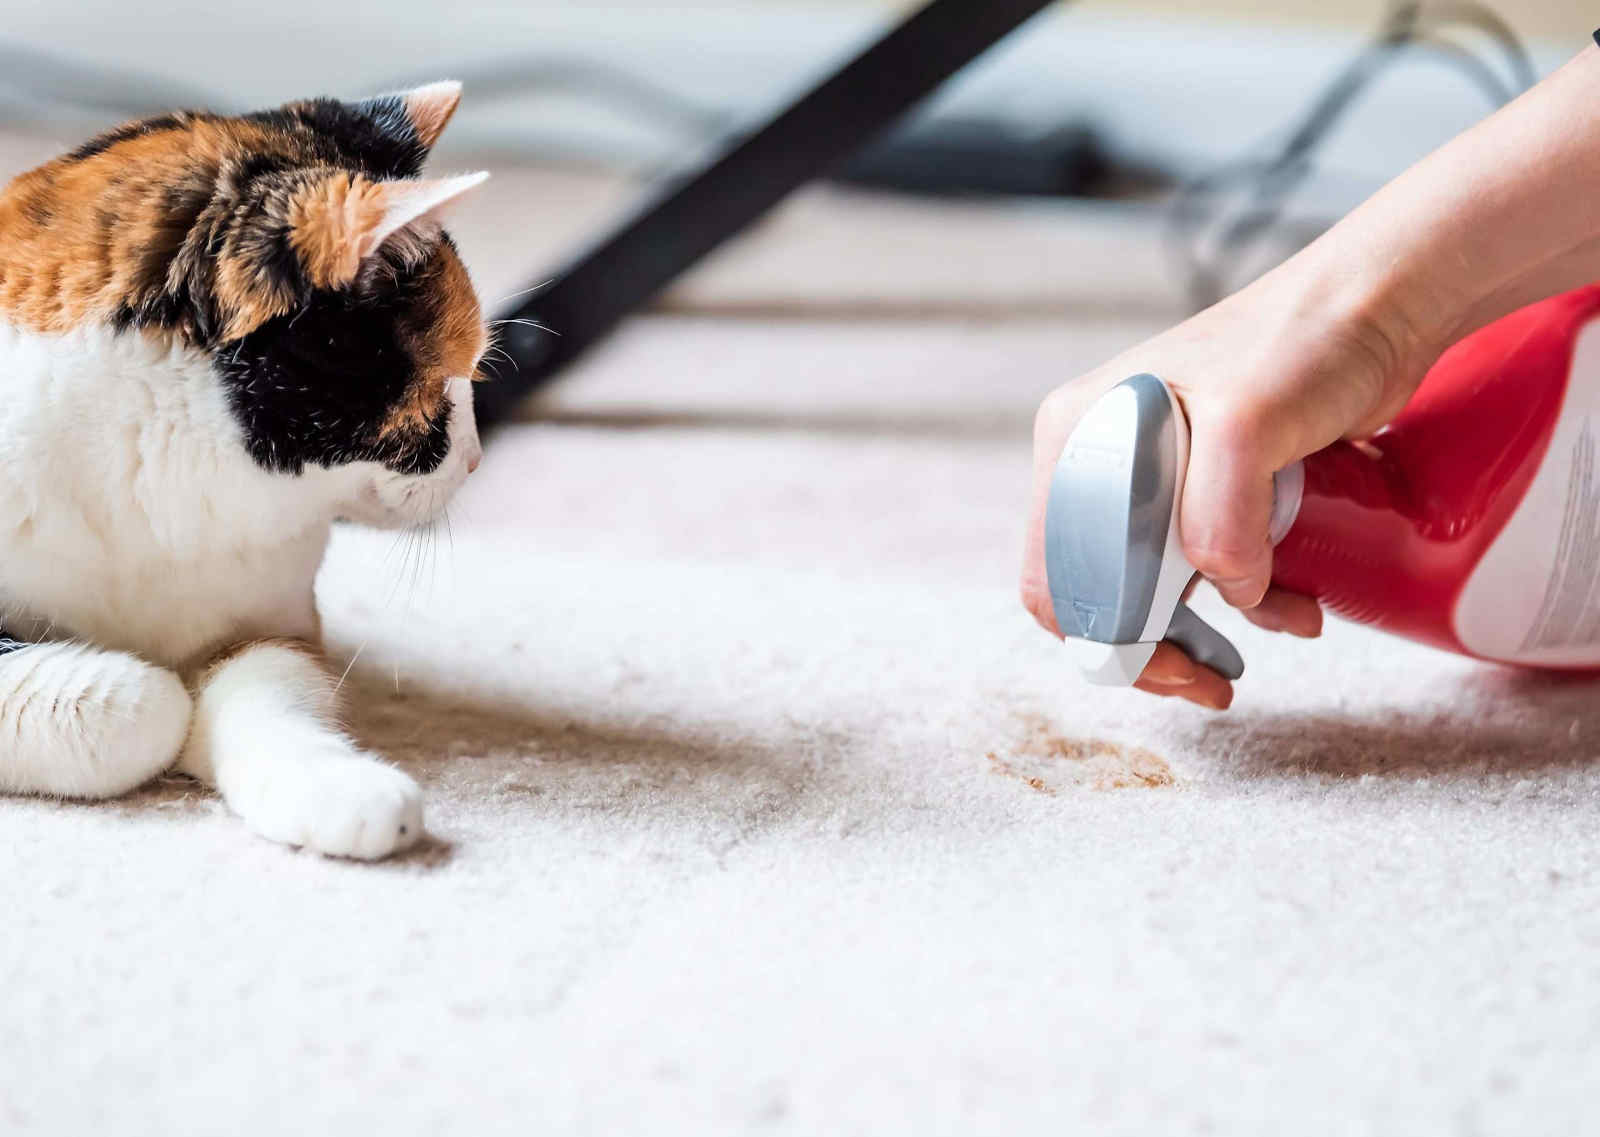 How To Clean Up After Your Pets If You Have Pet Stains On The Carpets